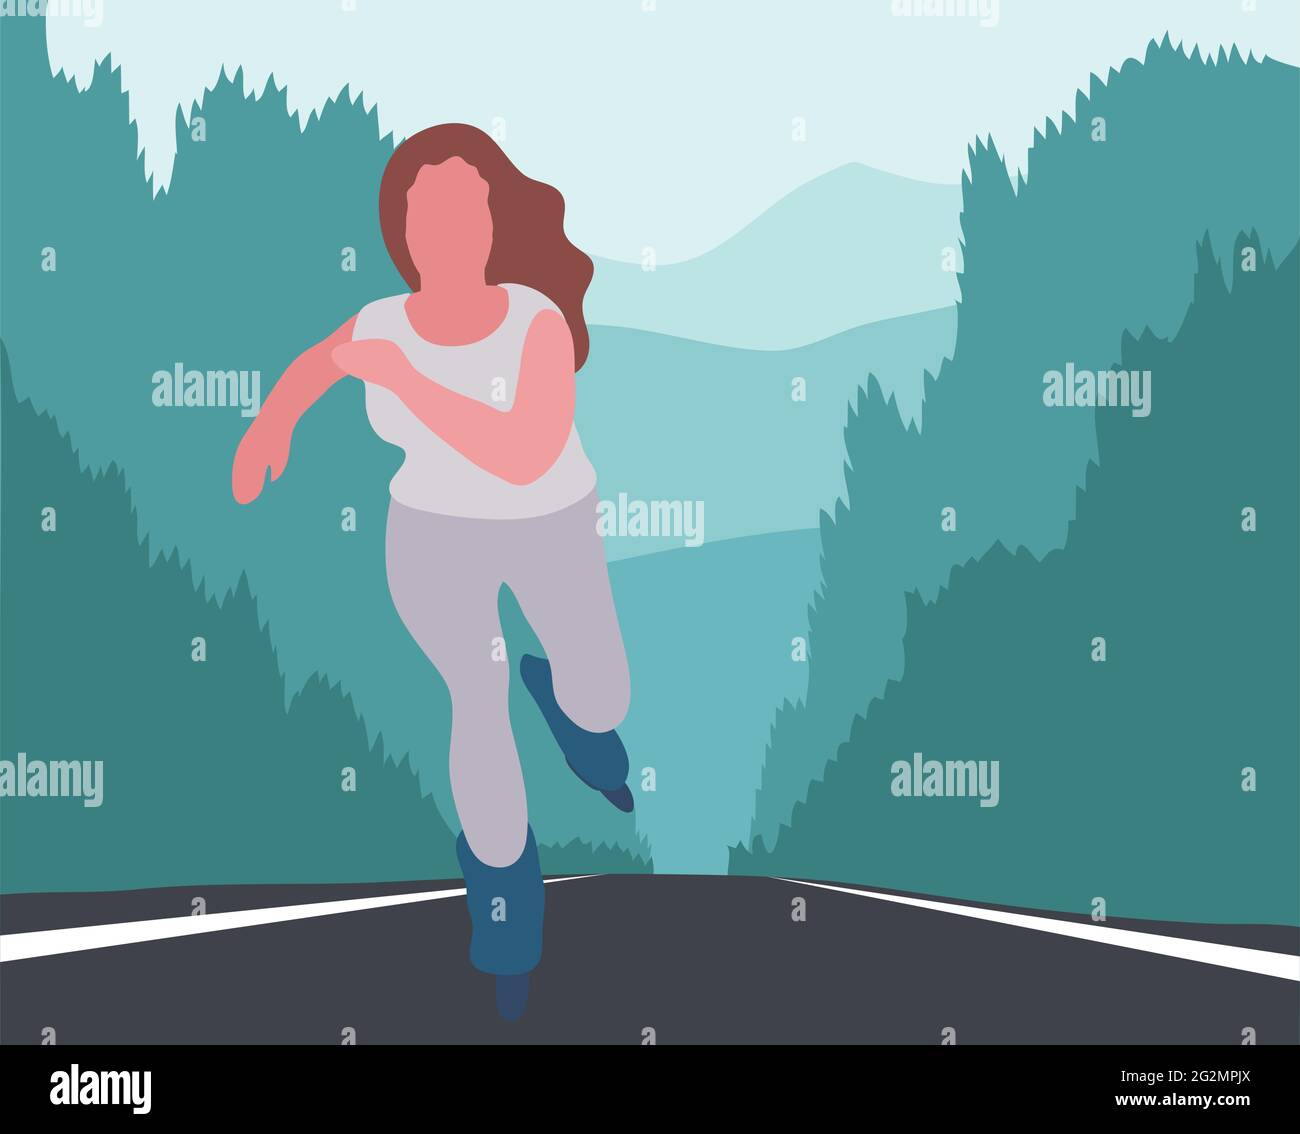 Skating very fast young woman on road flat style illustration Stock Vector